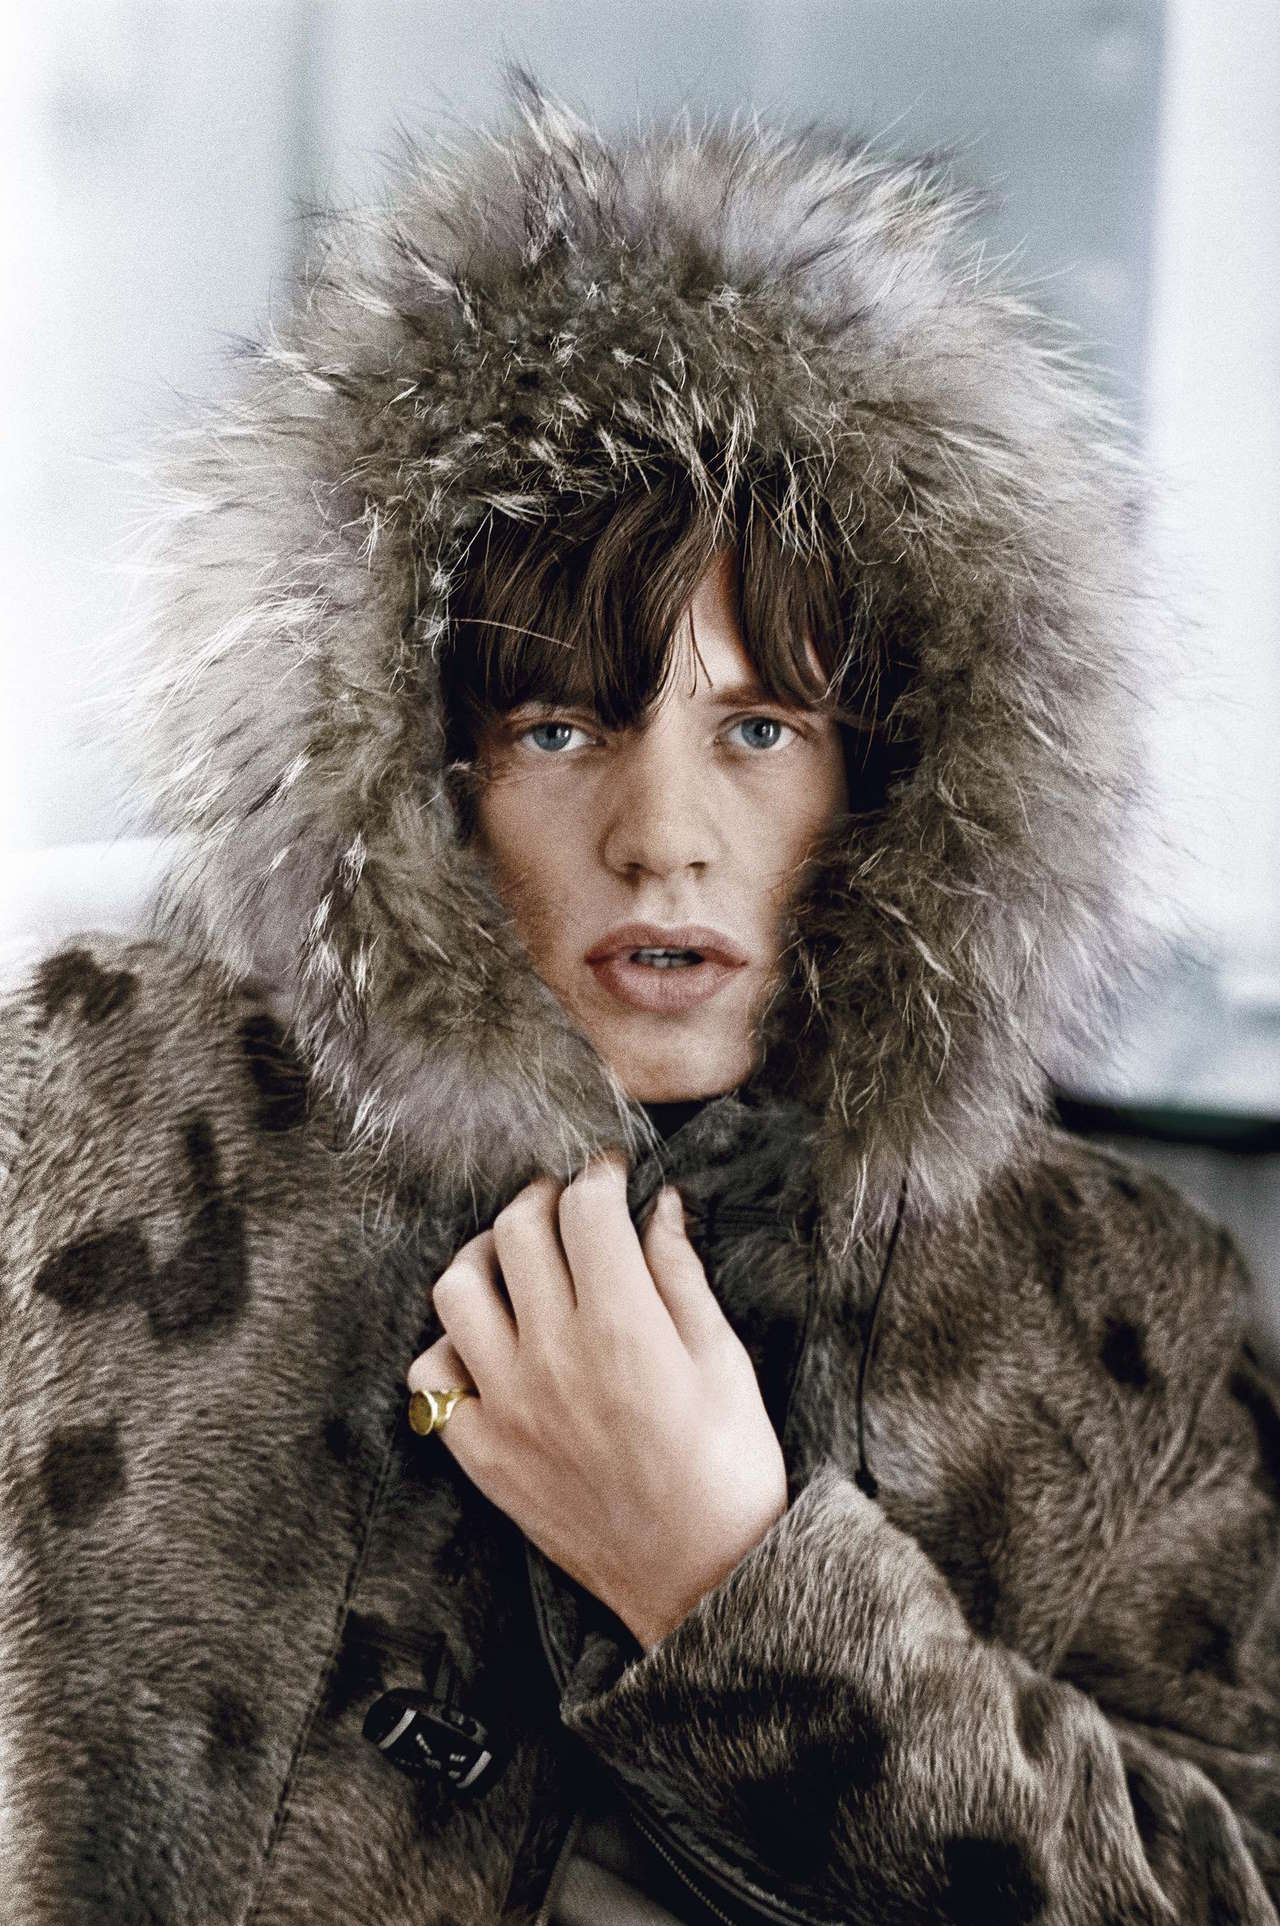 Terry O'Neill - Mick Jagger, Londen 1964 - © Iconic Images & Terry O'Neill